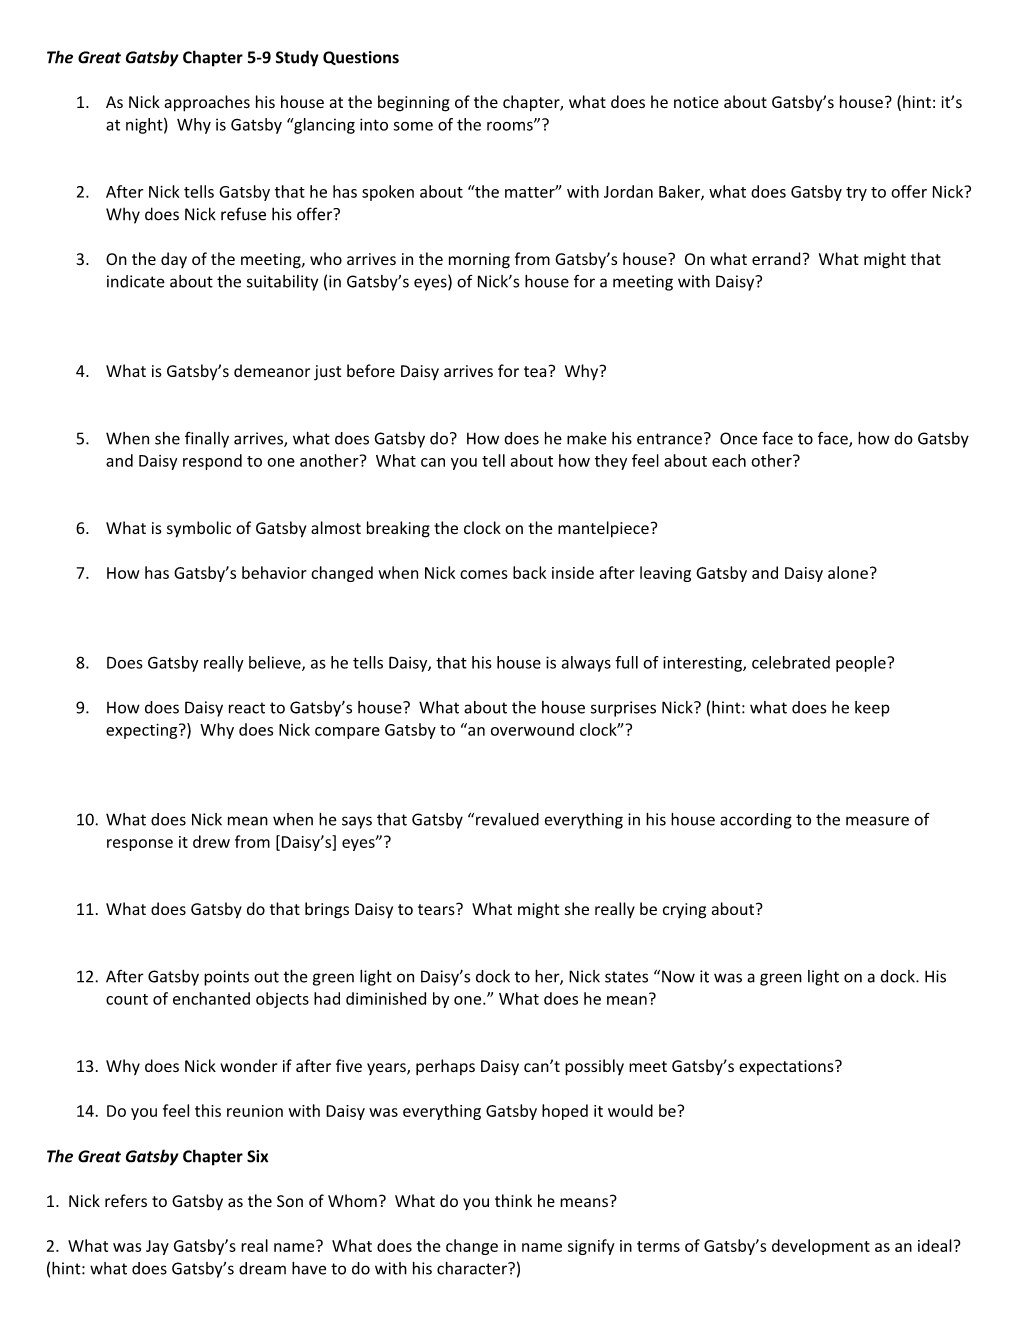 The Great Gatsby Chapter 5-9 Study Questions